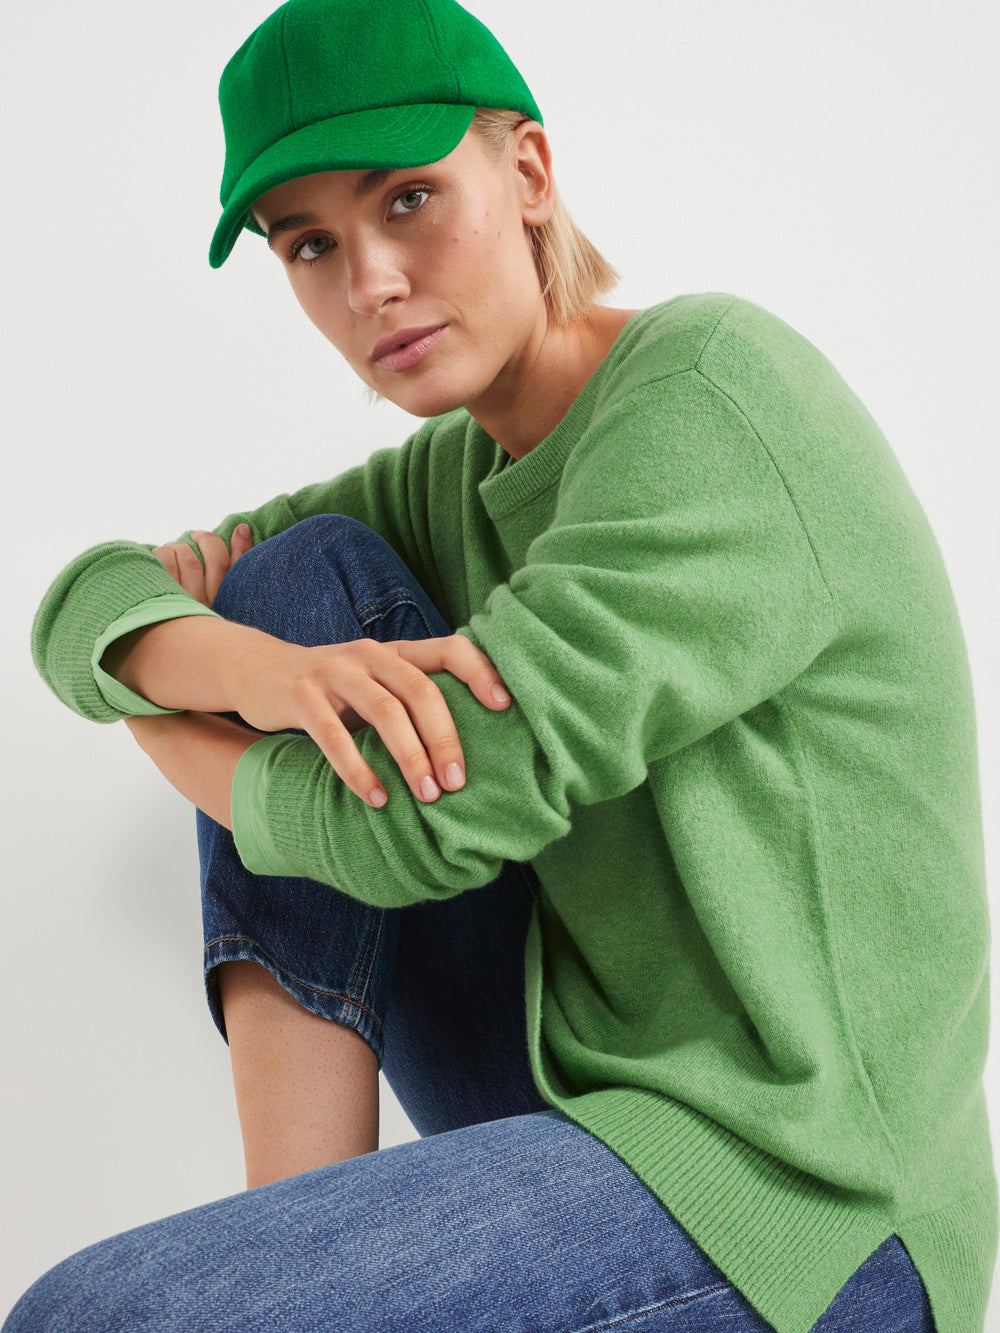 The Relaxed Open Neck Pullover